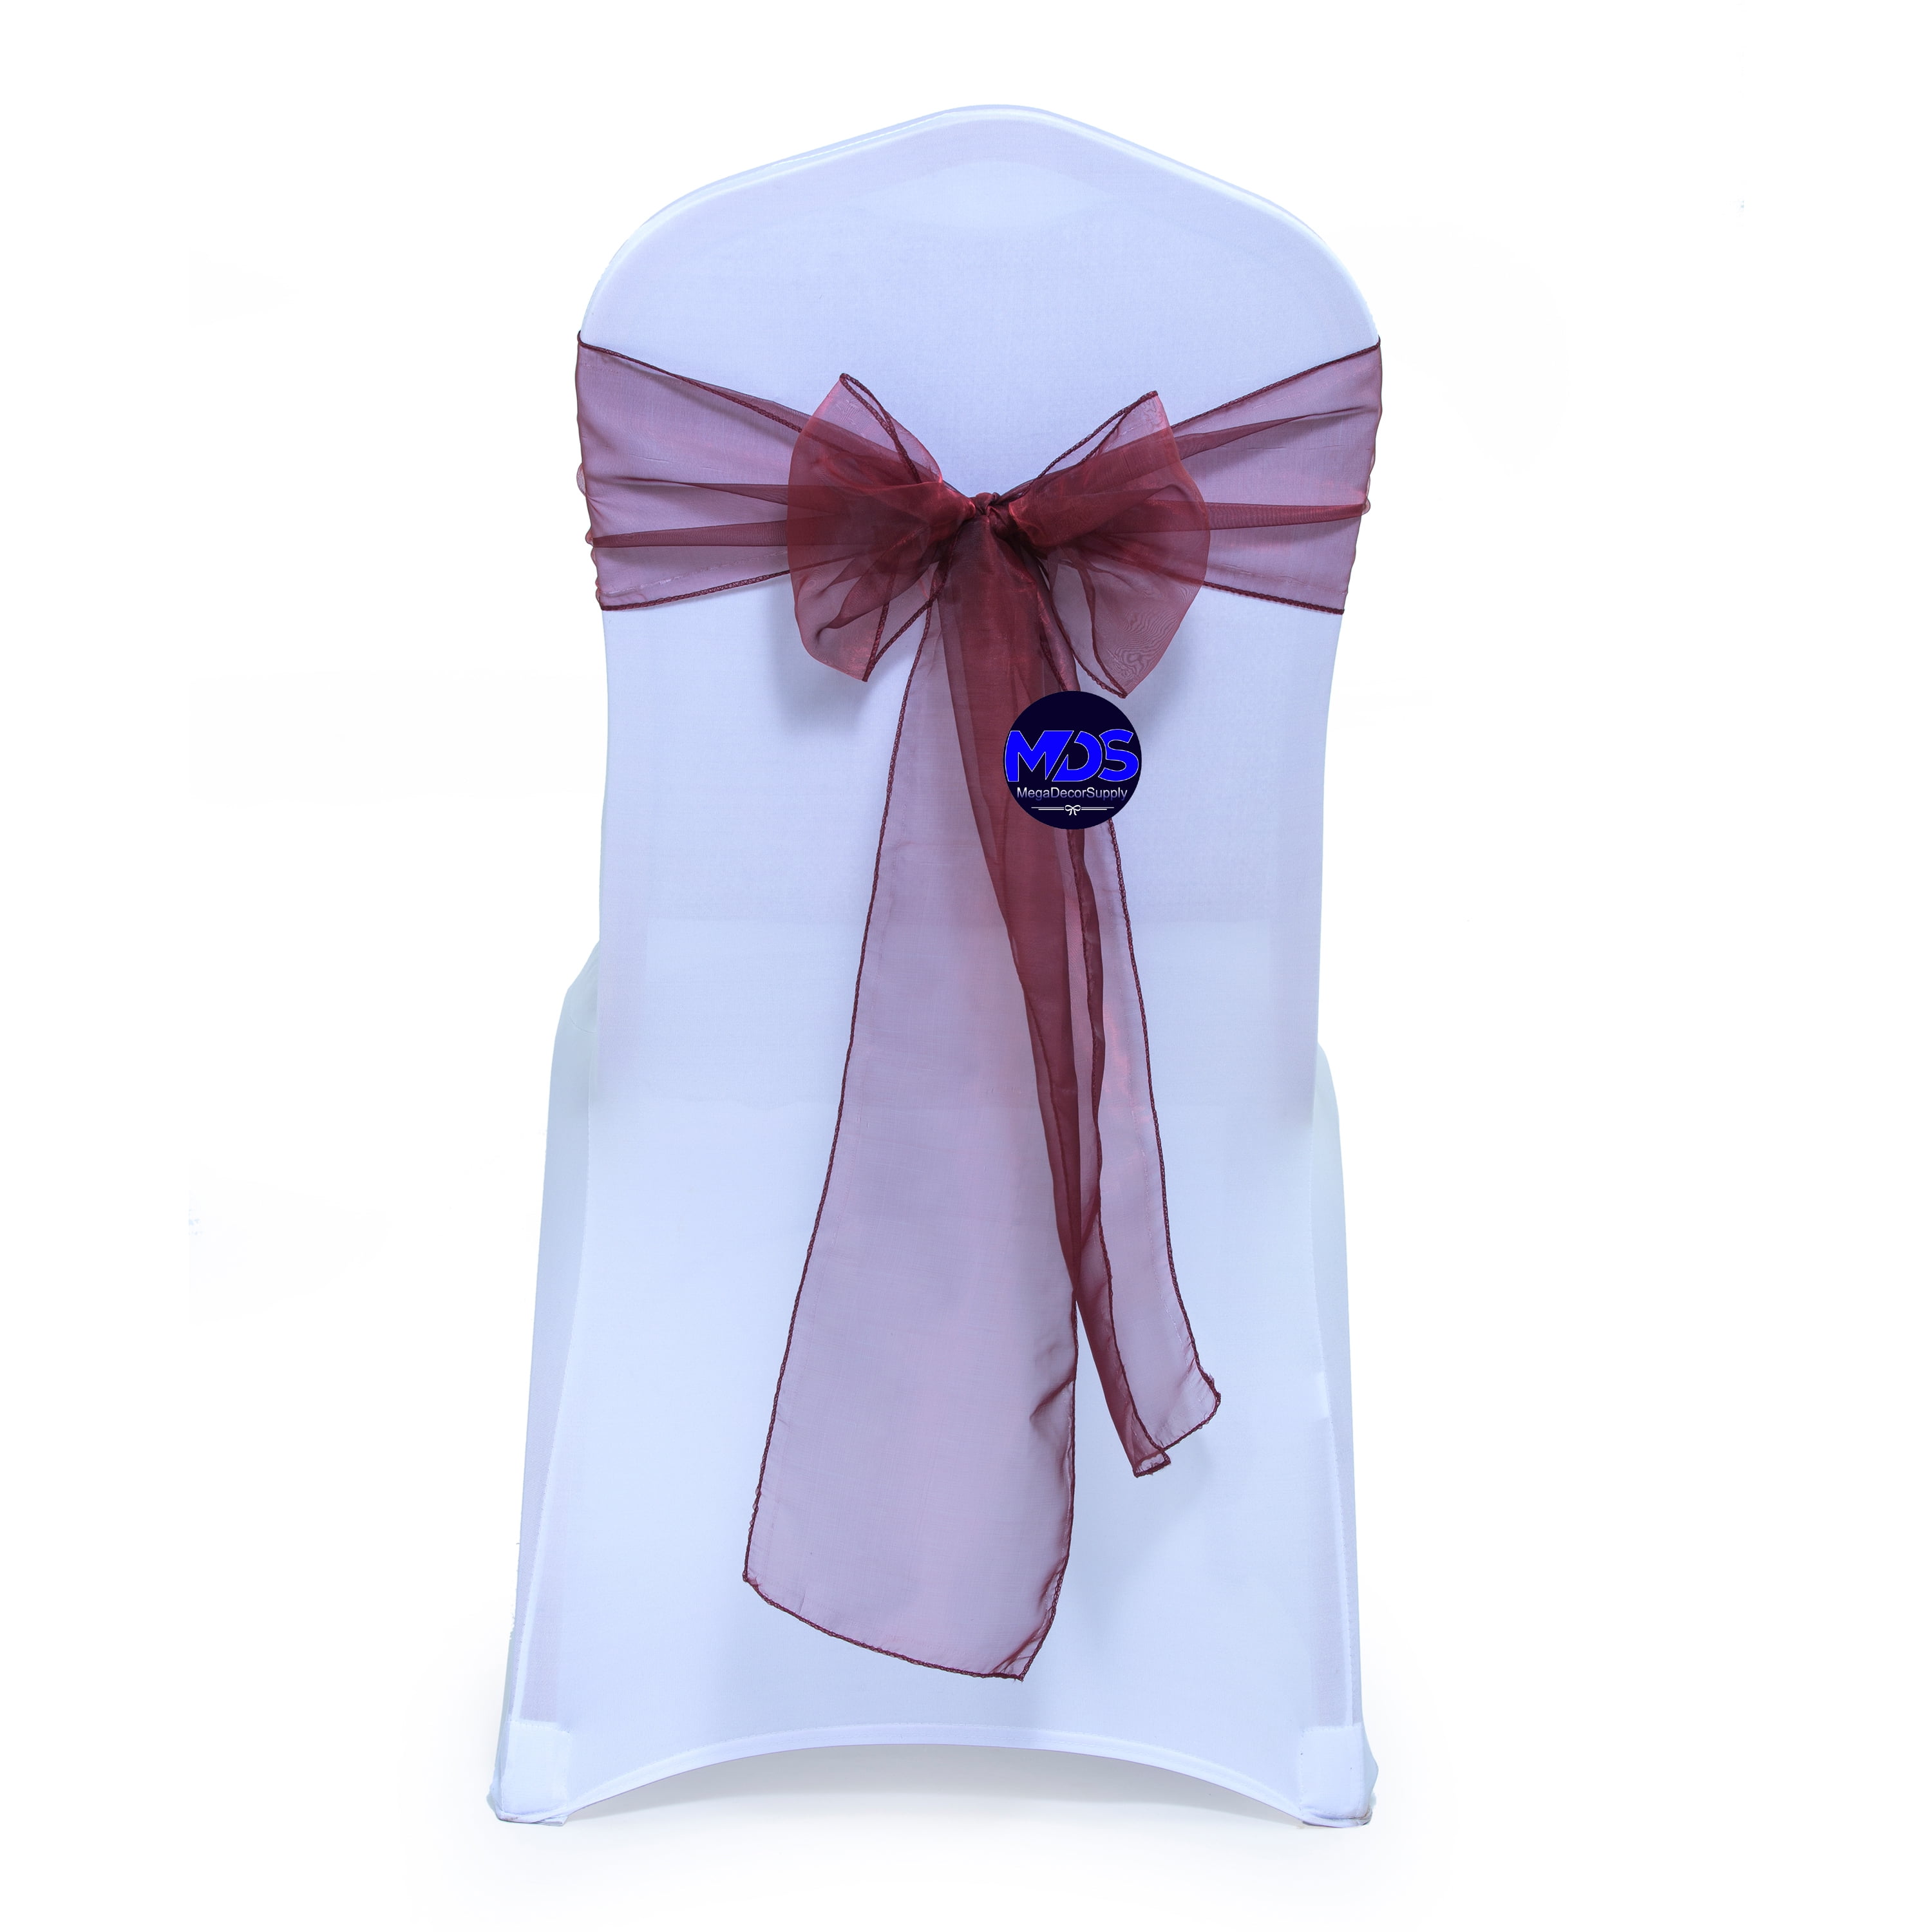 *** SALE *** 150 Chair Cover 150 Chair Sashes For Wedding,Party Events FOR HIRE 